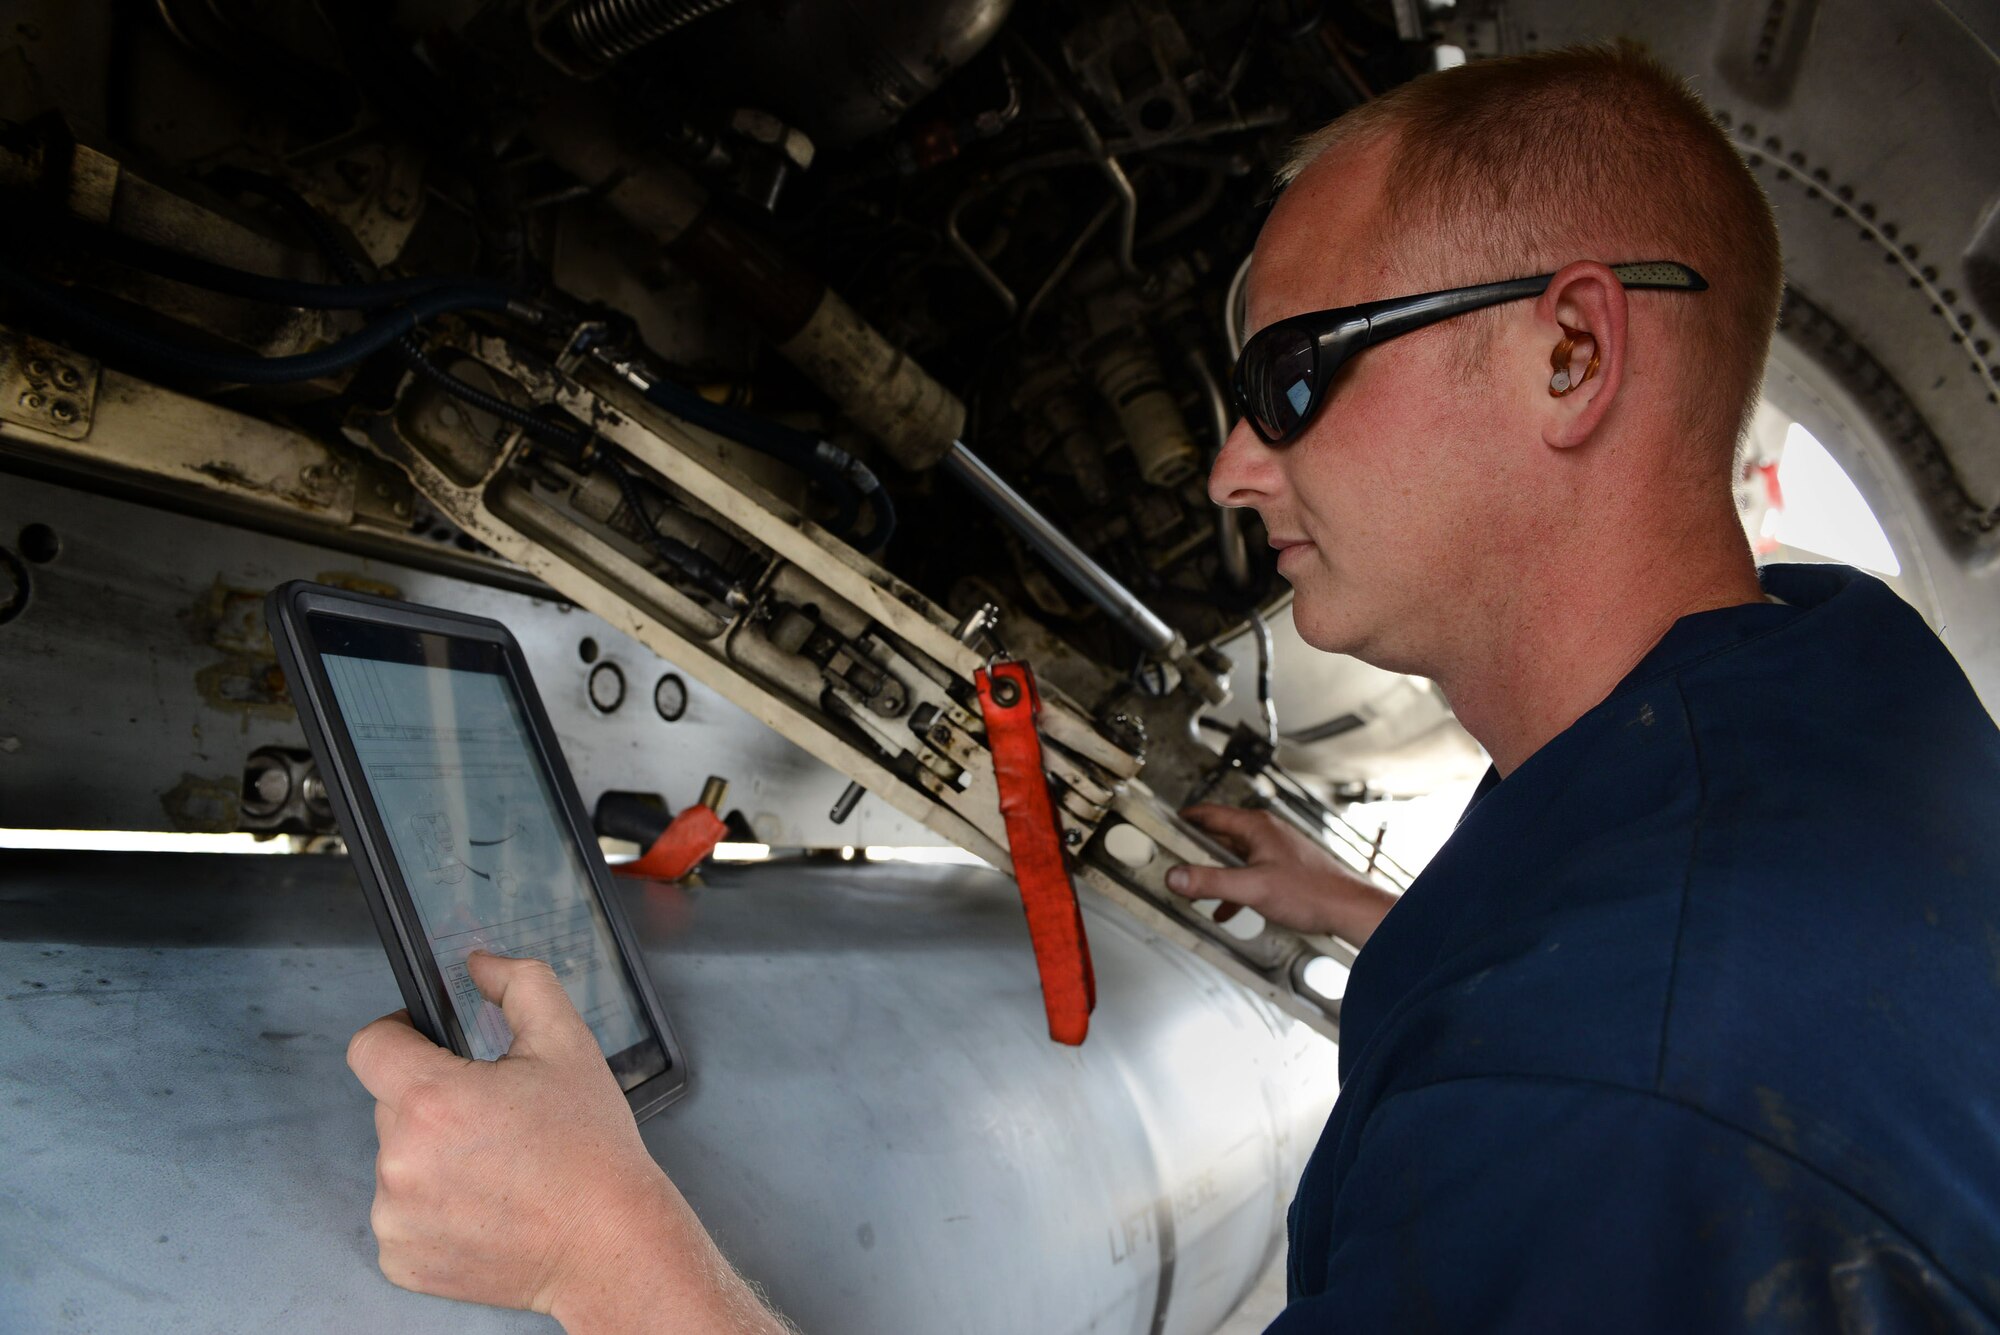 U.S. Air Force Senior Airman Matthew Leke, 20th Aircraft Maintenance Squadron, 55th Aircraft Maintenance Unit tactical aircraft maintainer, examines the inside of an F-16CJ Fighting Falcon at Shaw Air Force Base, S.C., April 29, 2014.  Leke was using an iPad while testing its usability in place of a technical order manual during post-flight inspections. (U.S. Air Force photo by Airman 1st Class Jensen Stidham/Released)